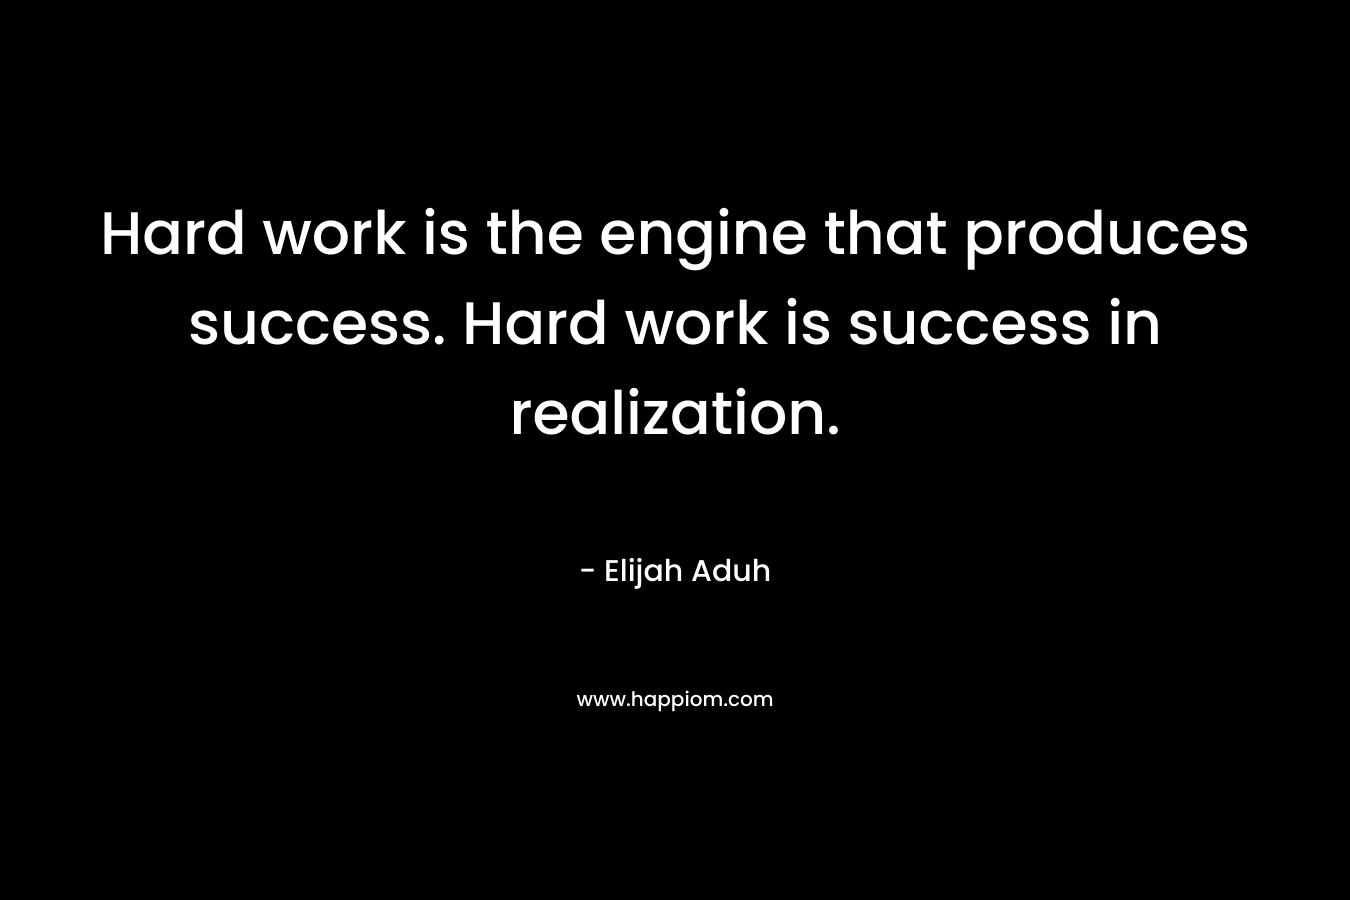 Hard work is the engine that produces success. Hard work is success in realization. – Elijah Aduh